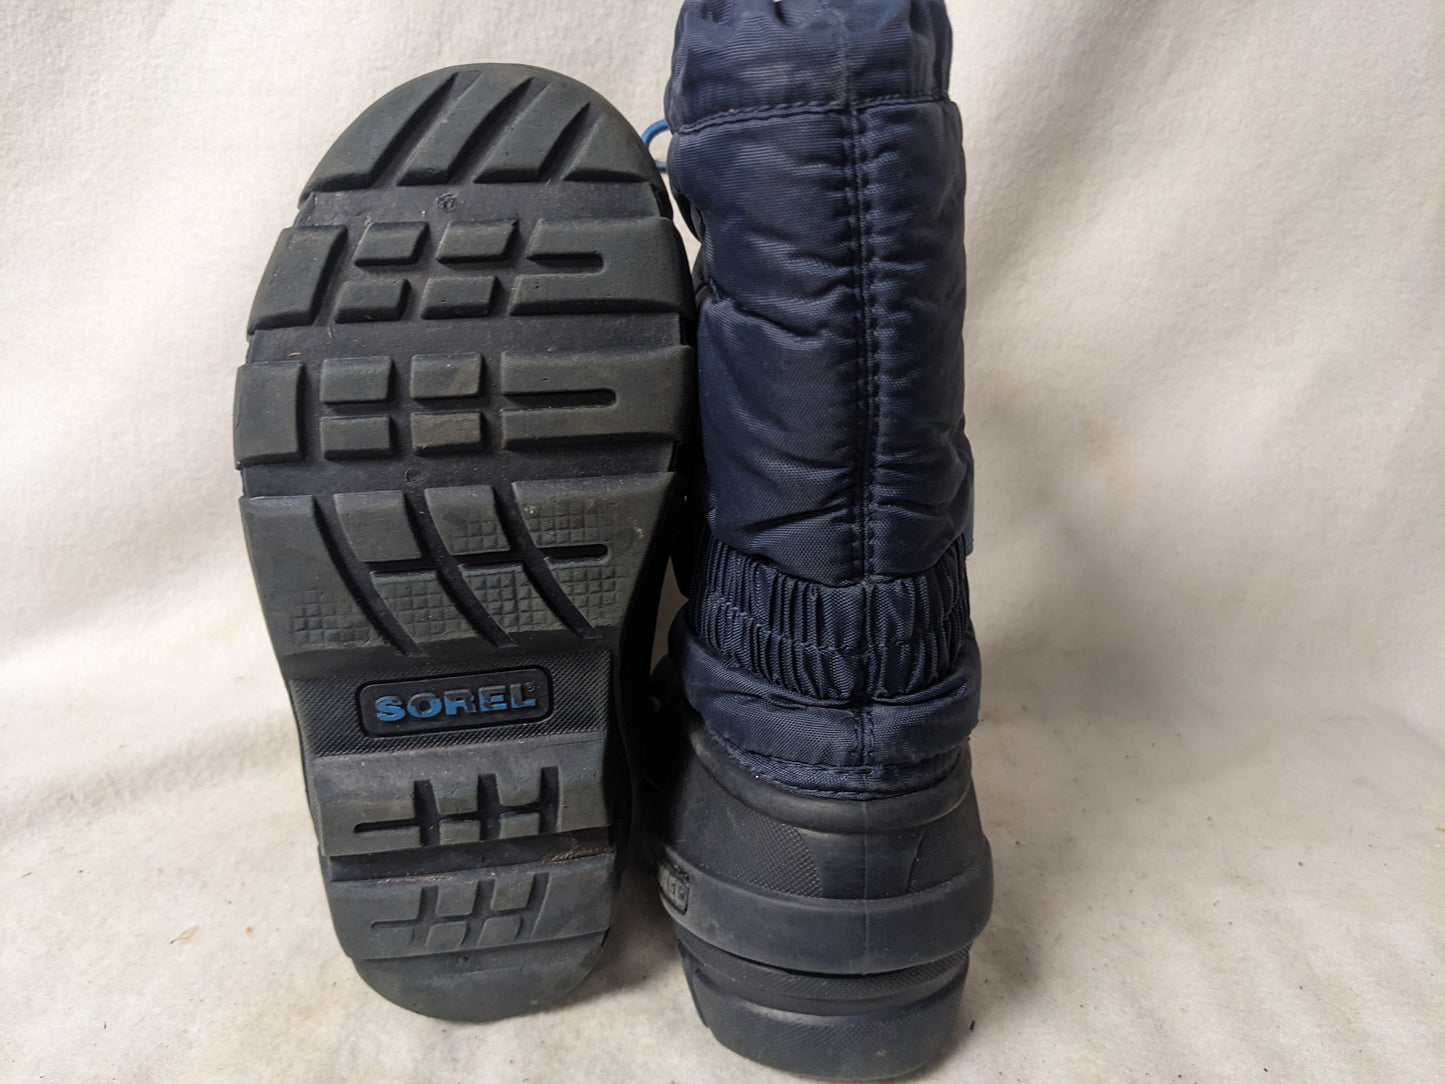 Sorel Youth Insulated Snow Boots Size 1 Color Black Condition Used